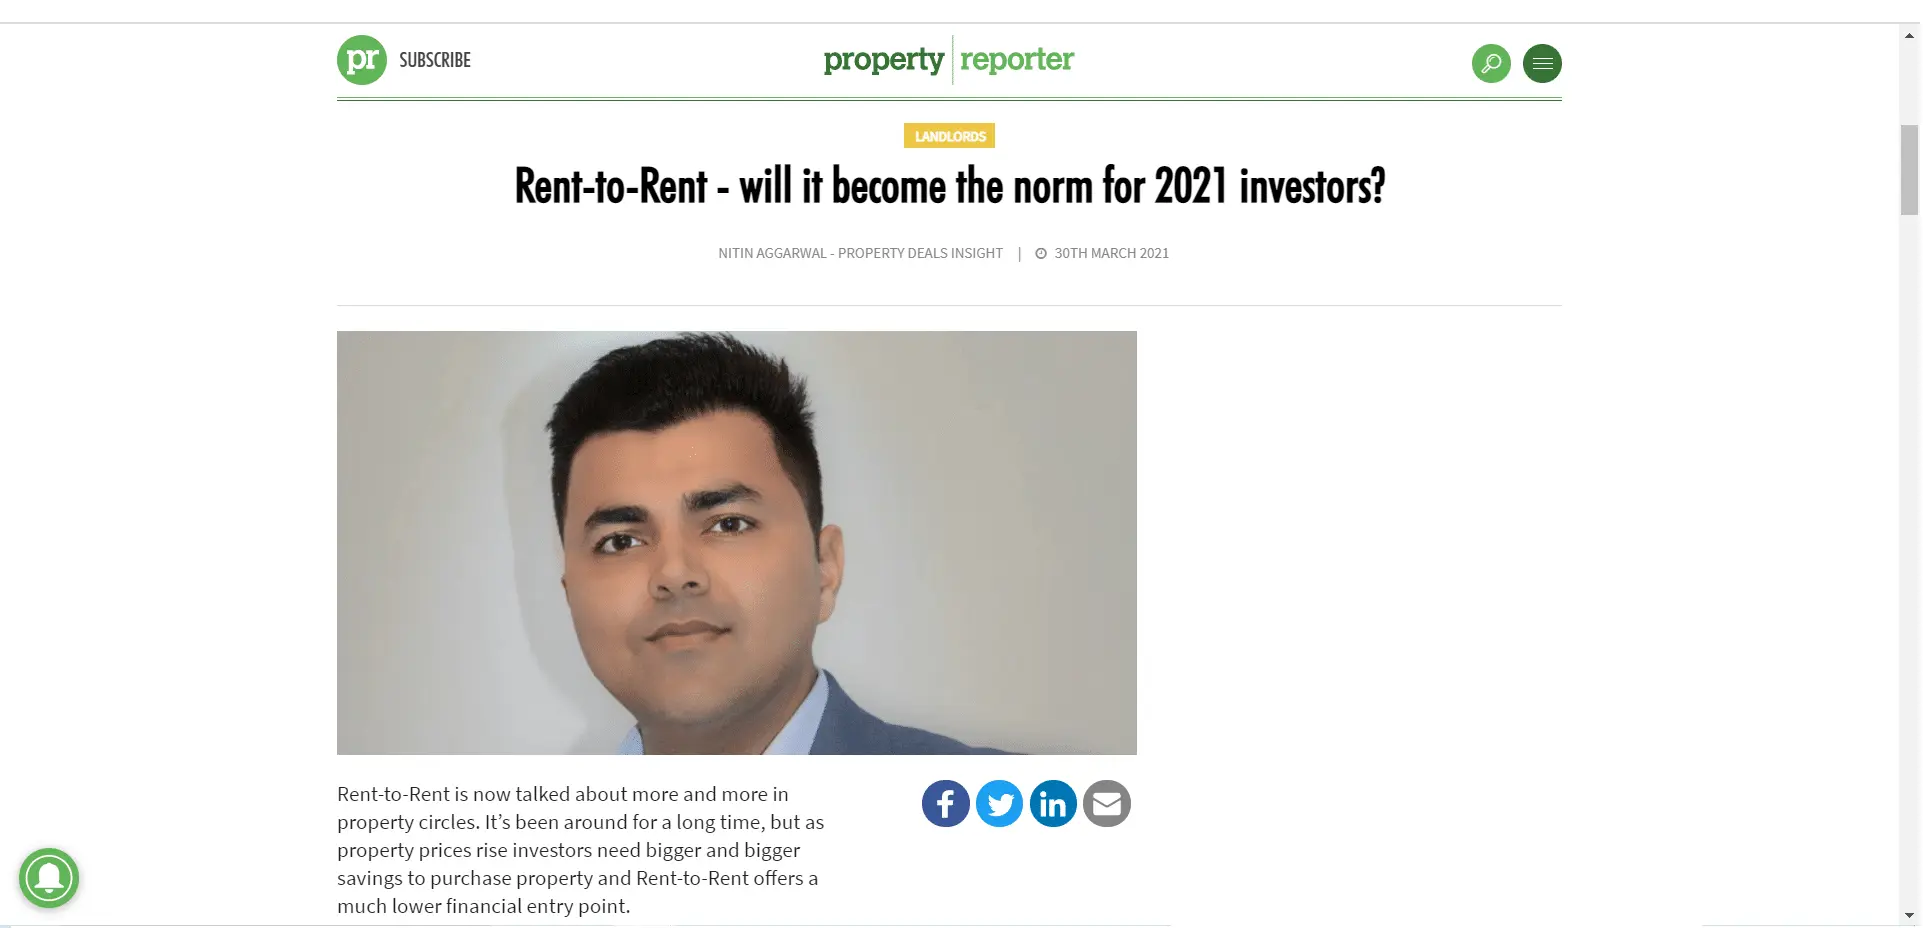 Rent-to-Rent - will it become the norm for 2021 investors?